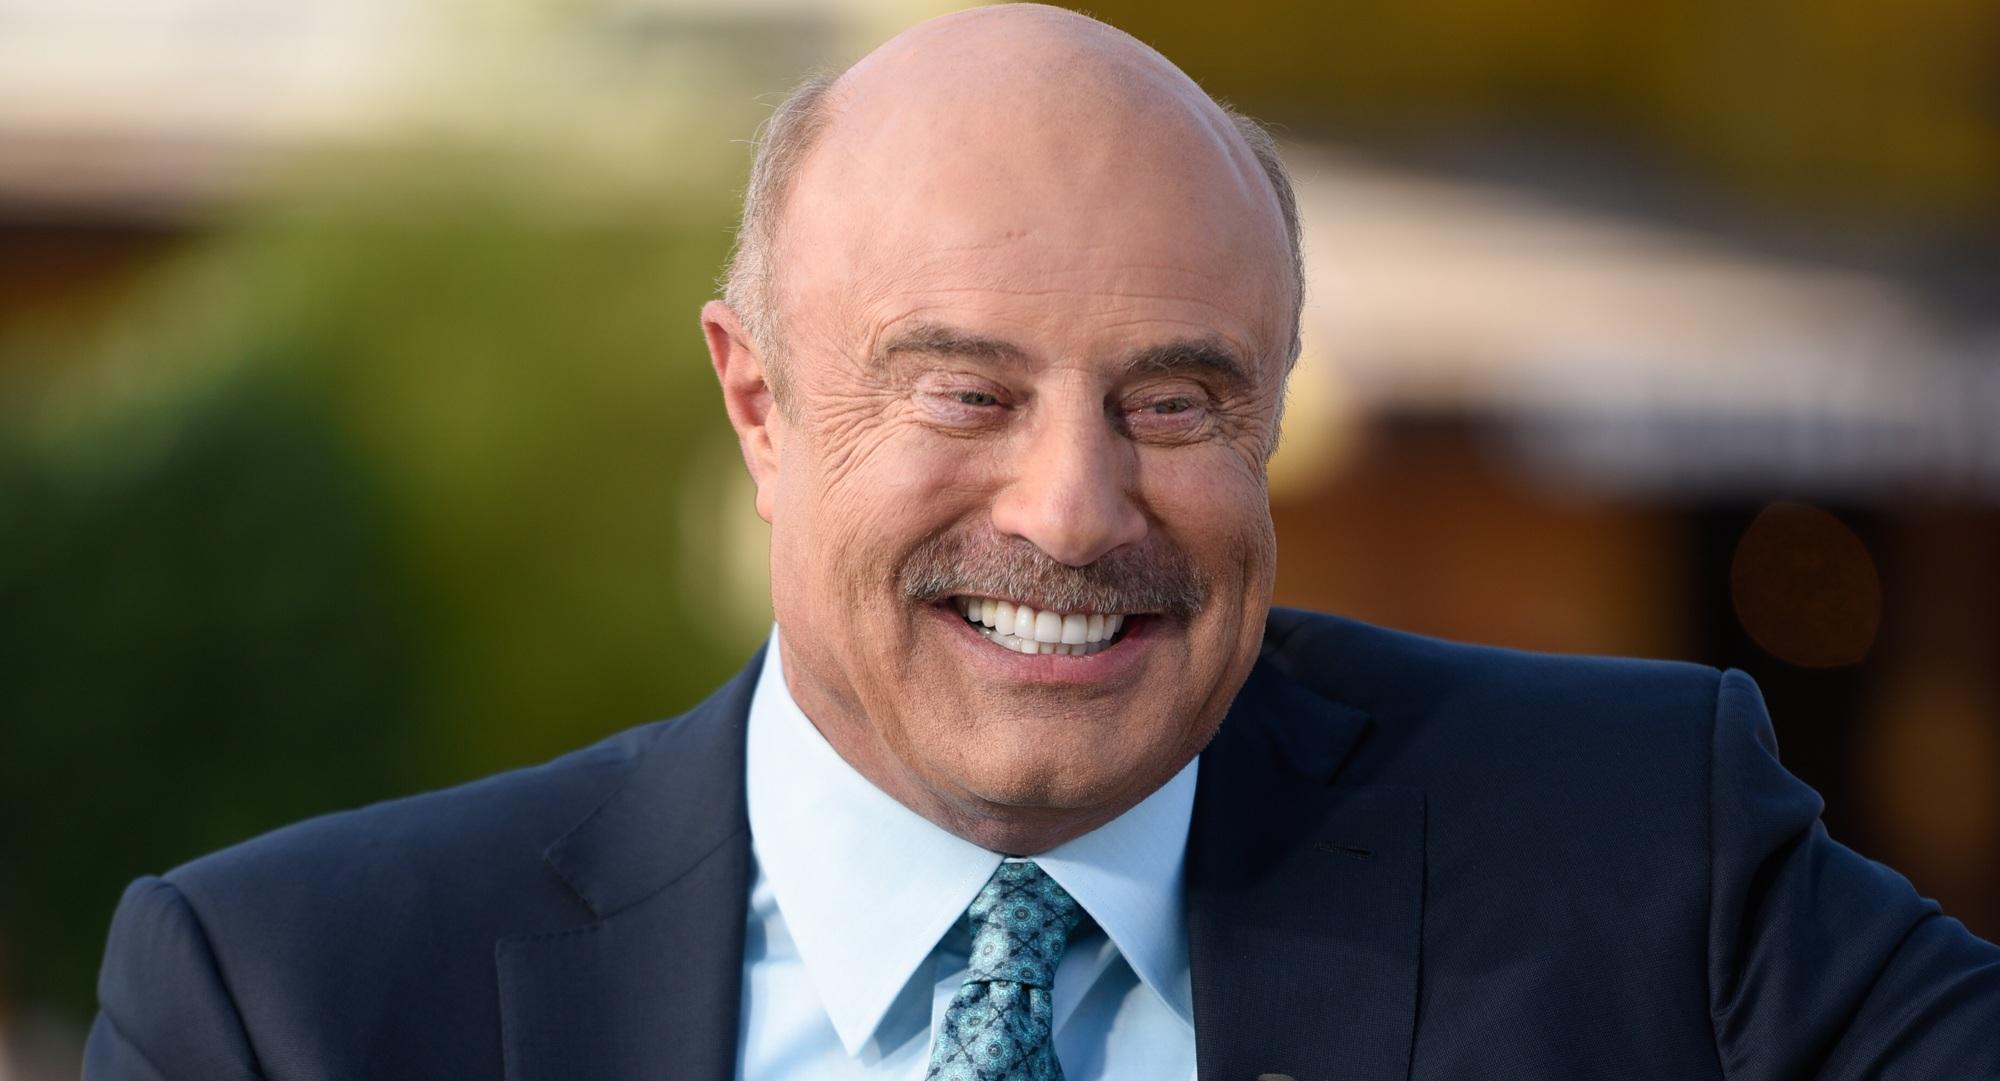 Dr. Phil visits "Extra" at Universal Studios Hollywood on April 26, 2016